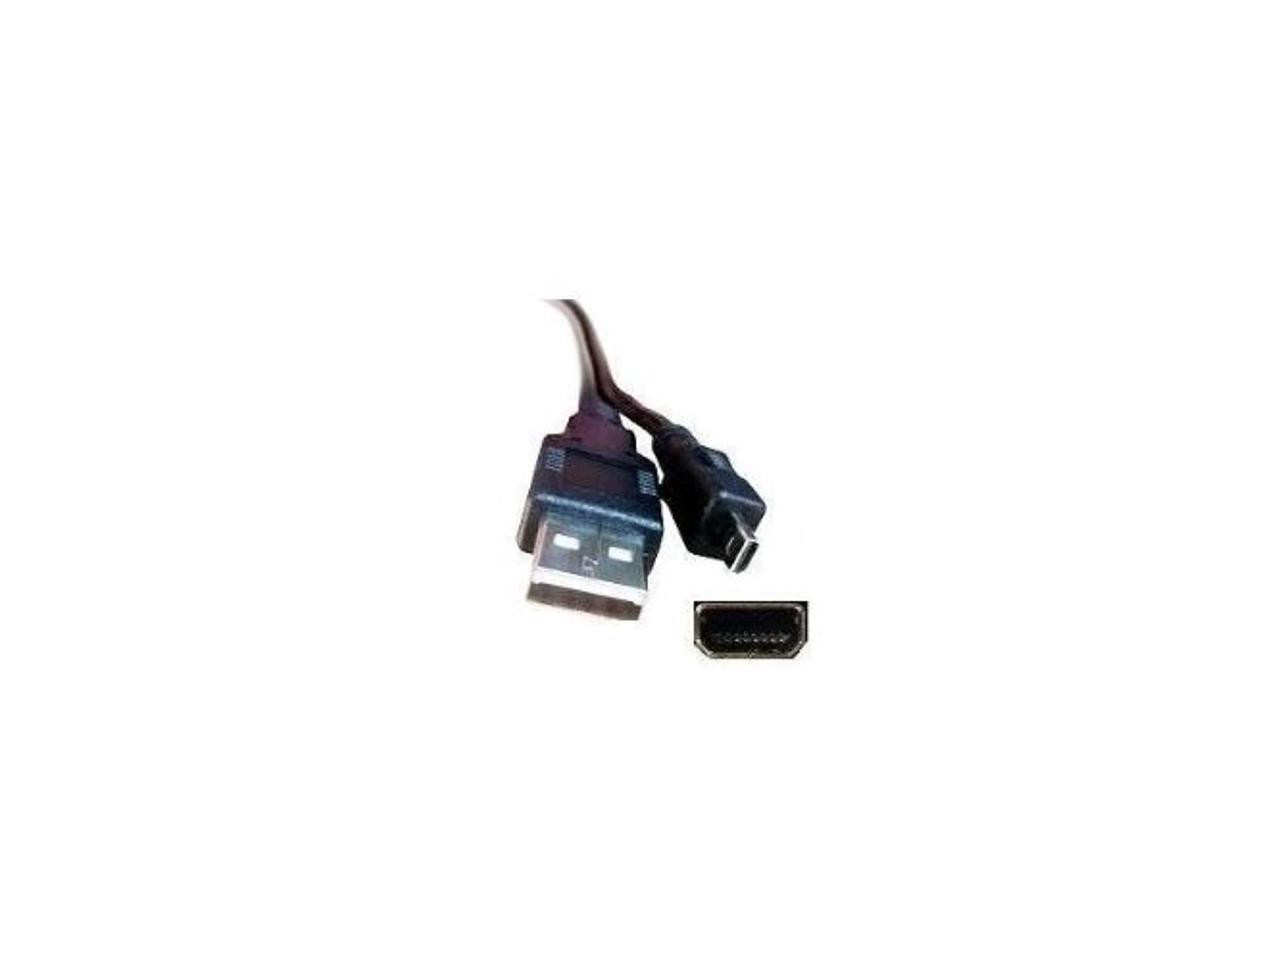 SONY  DCR-SR58E,DCR-SR65 CAMERA USB DATA SYNC CABLE LEAD FOR PC AND MAC 